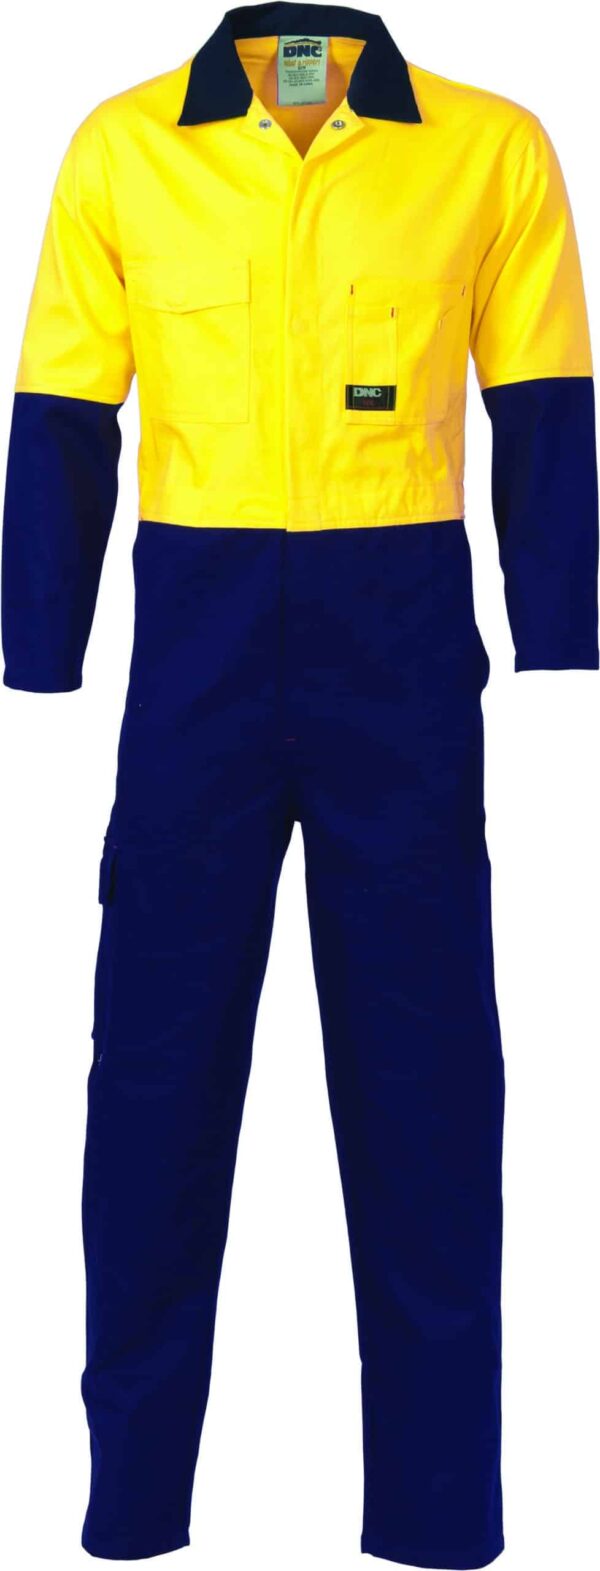 DNC Workwear Hi Vis Two Tone Cotton Coverall